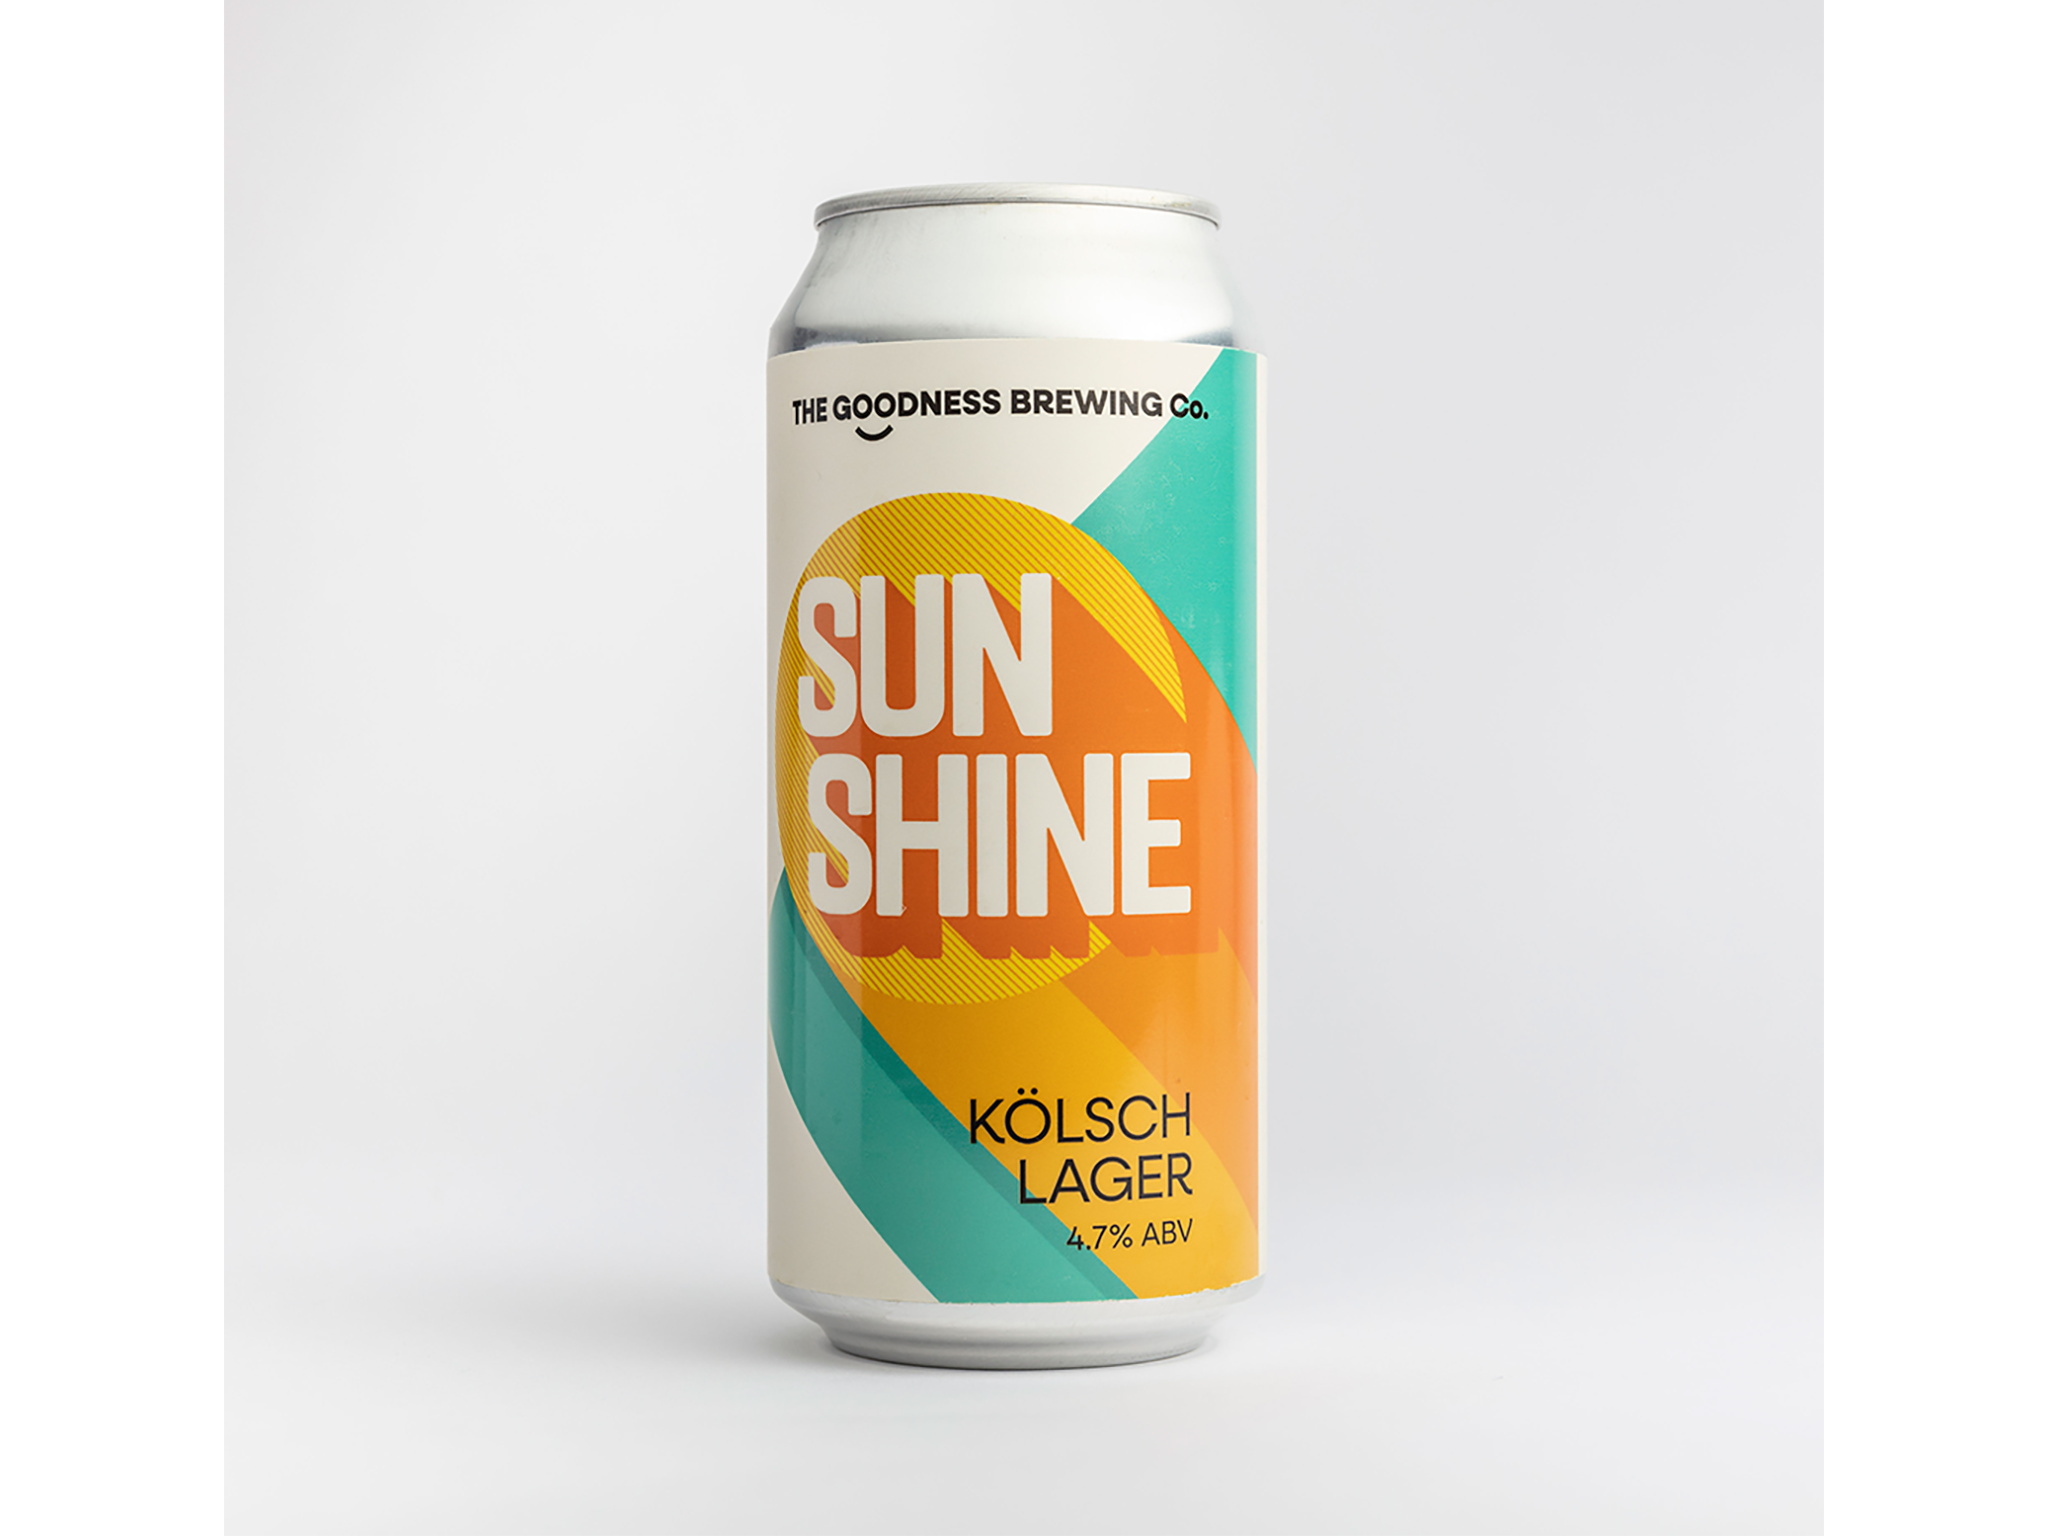 The Goodness Brewing Co sunshine kolsch lager